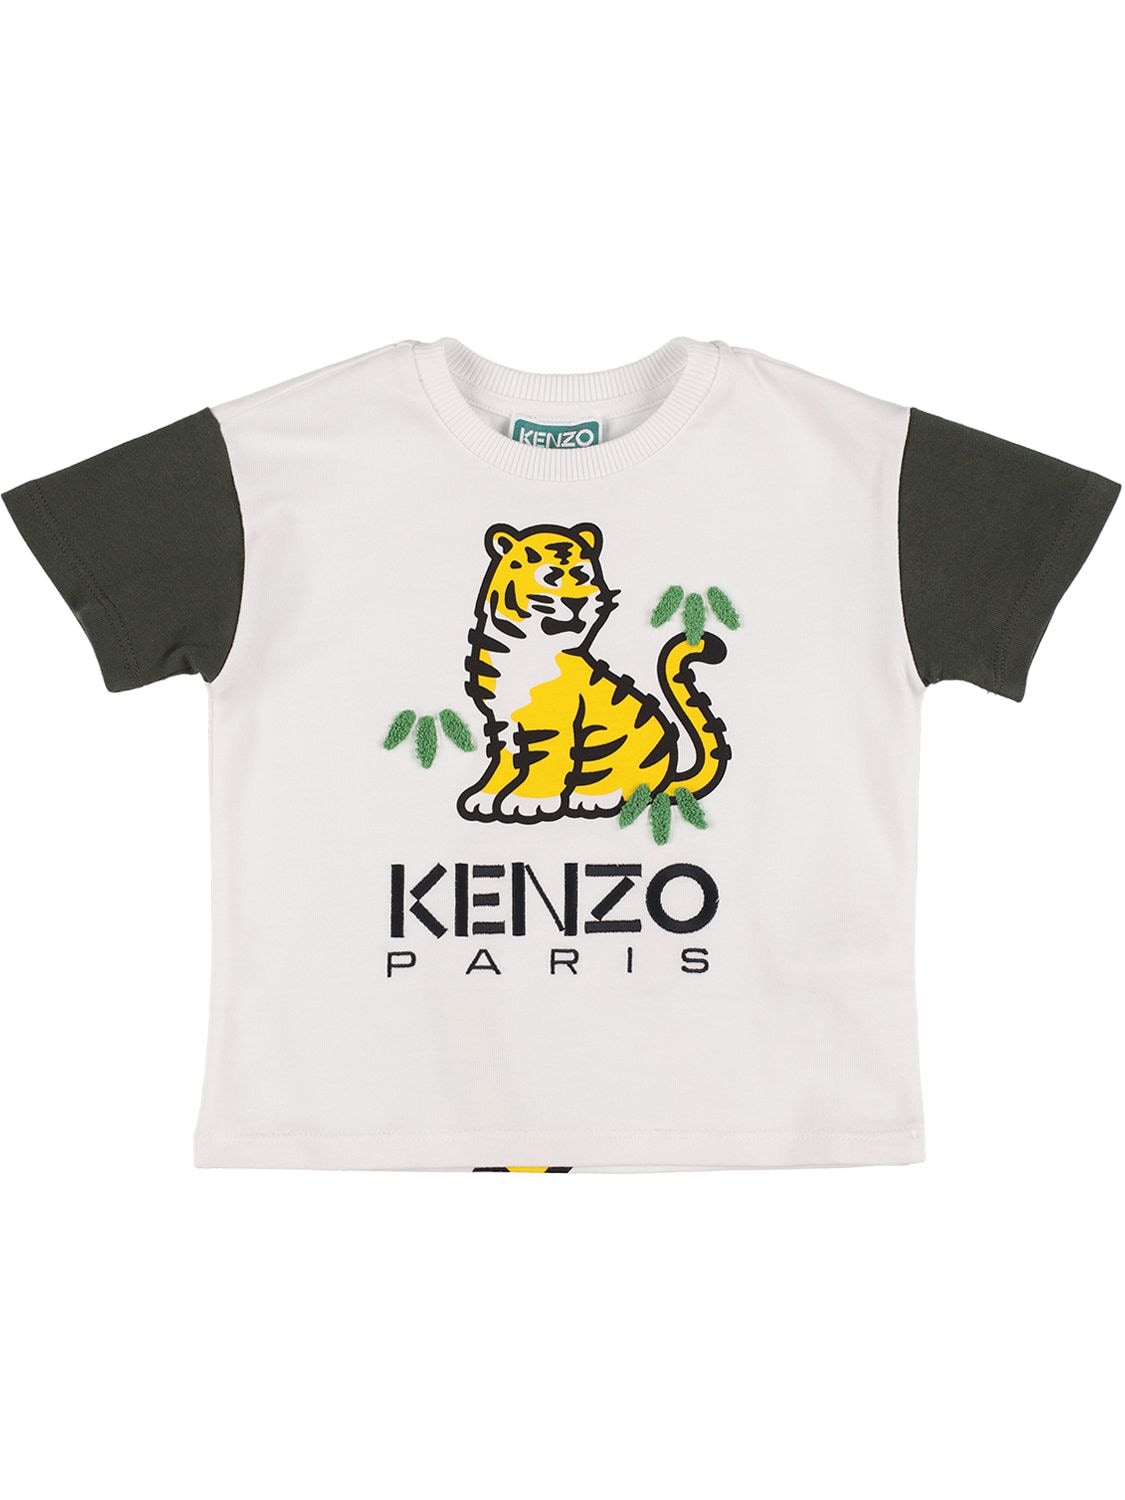 Kenzo Kids' Embroidered Cotton Jersey T-shirt In White,green